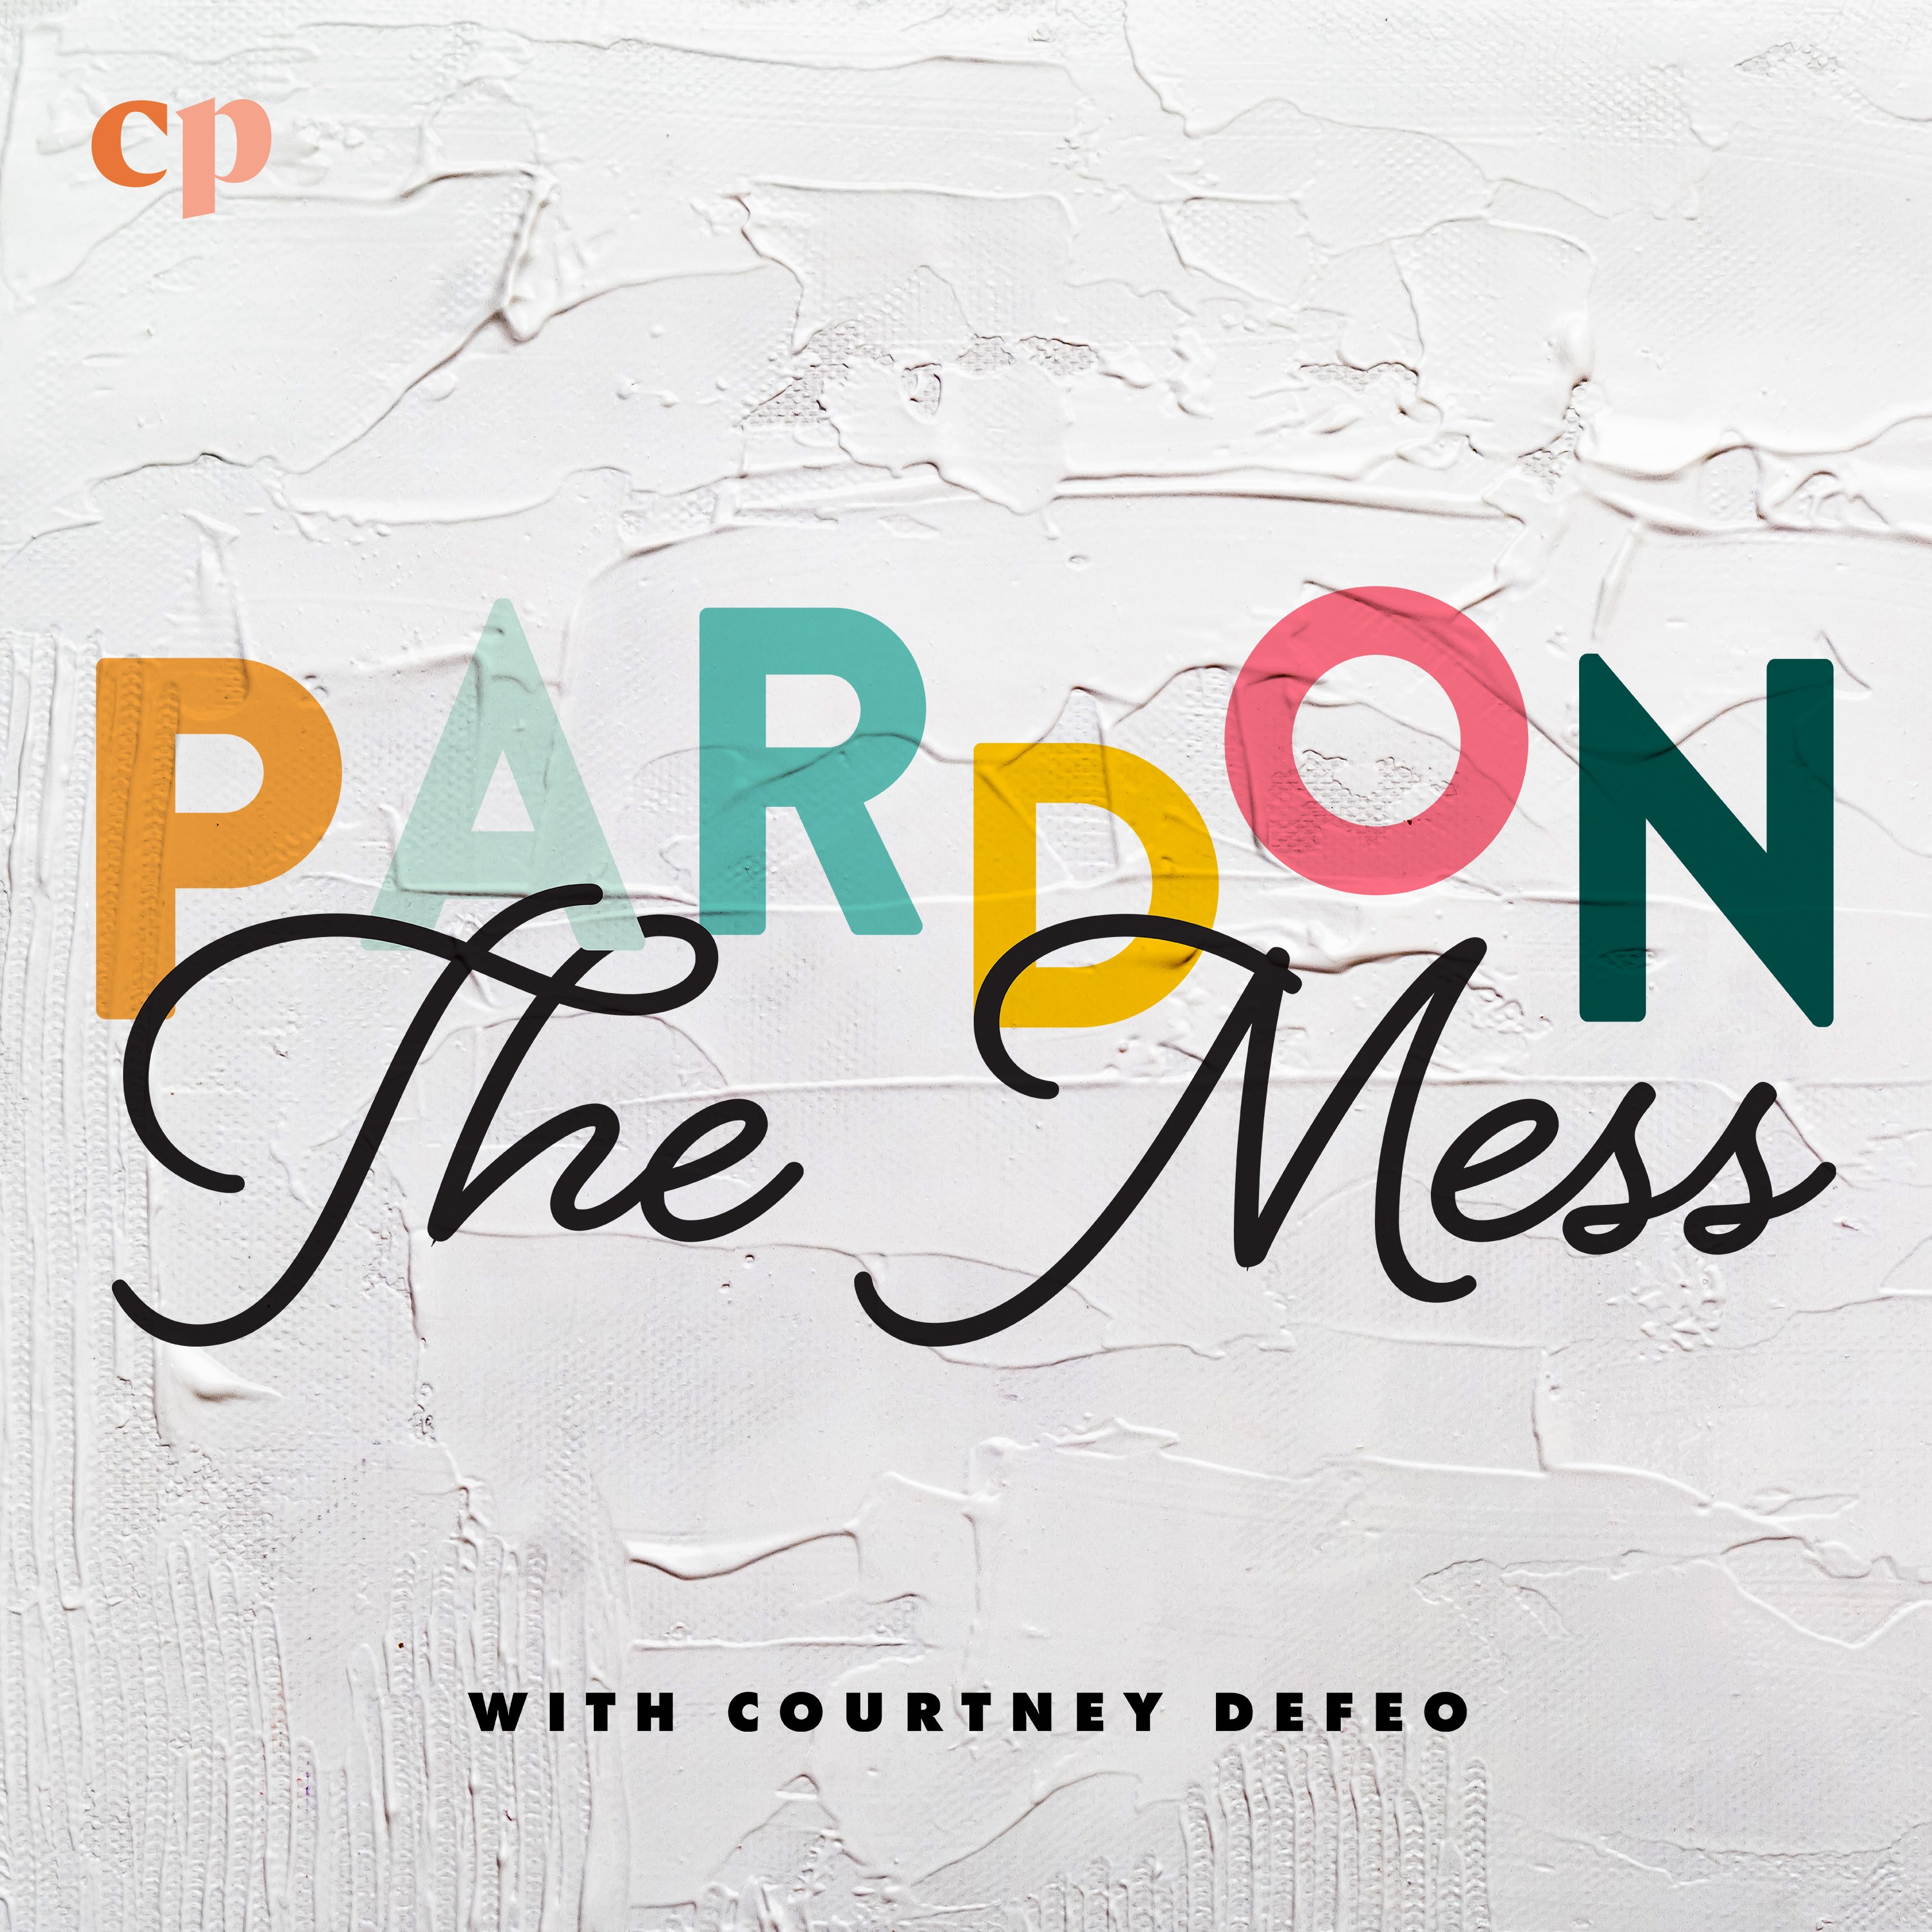 Pardon the Mess with Courtney DeFeo